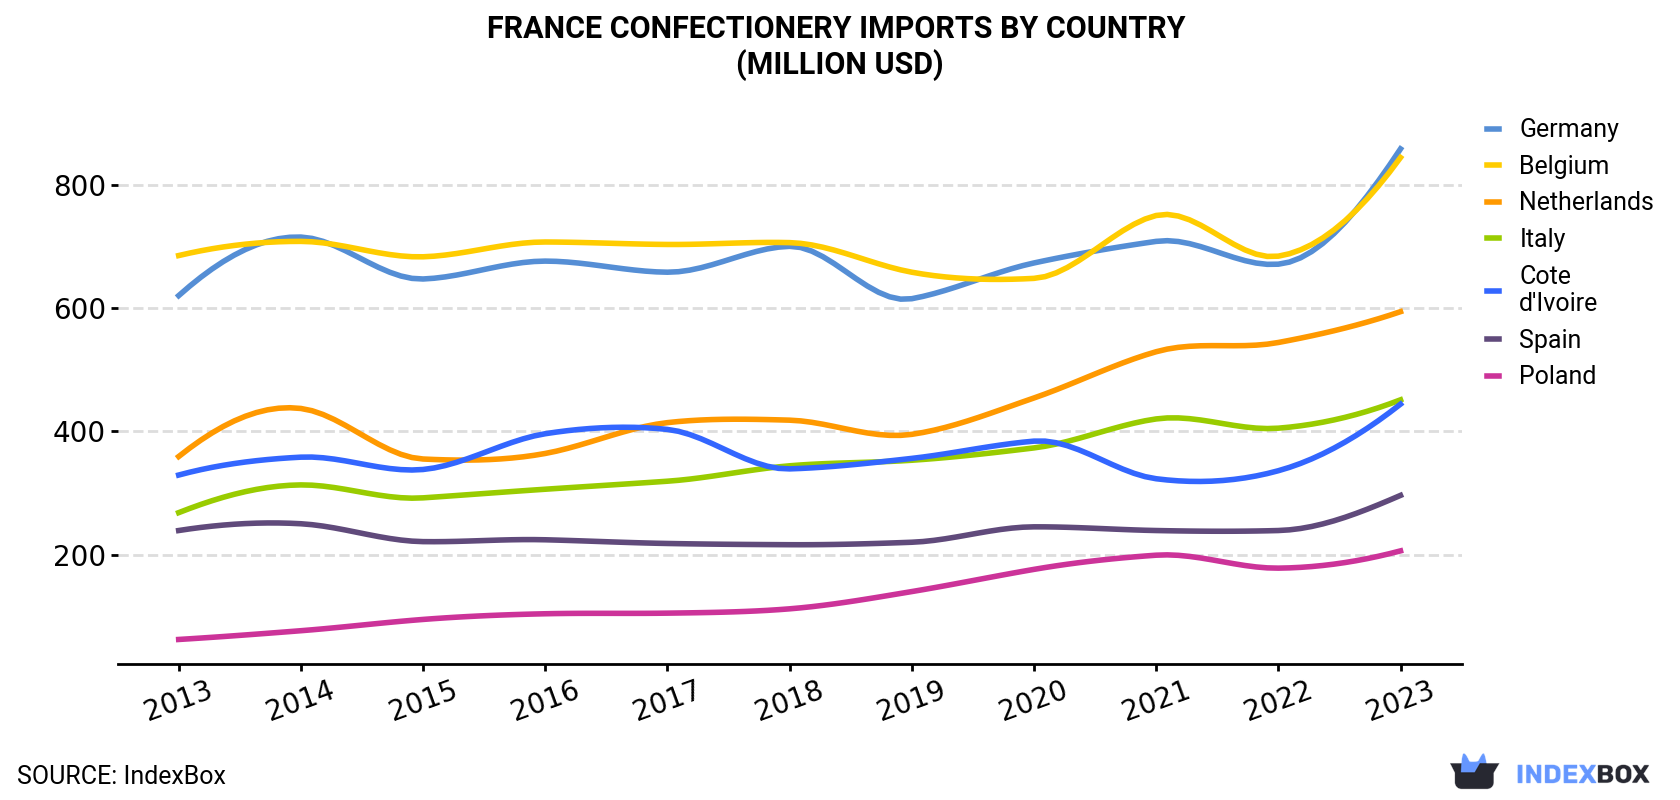 France Confectionery Imports By Country (Million USD)